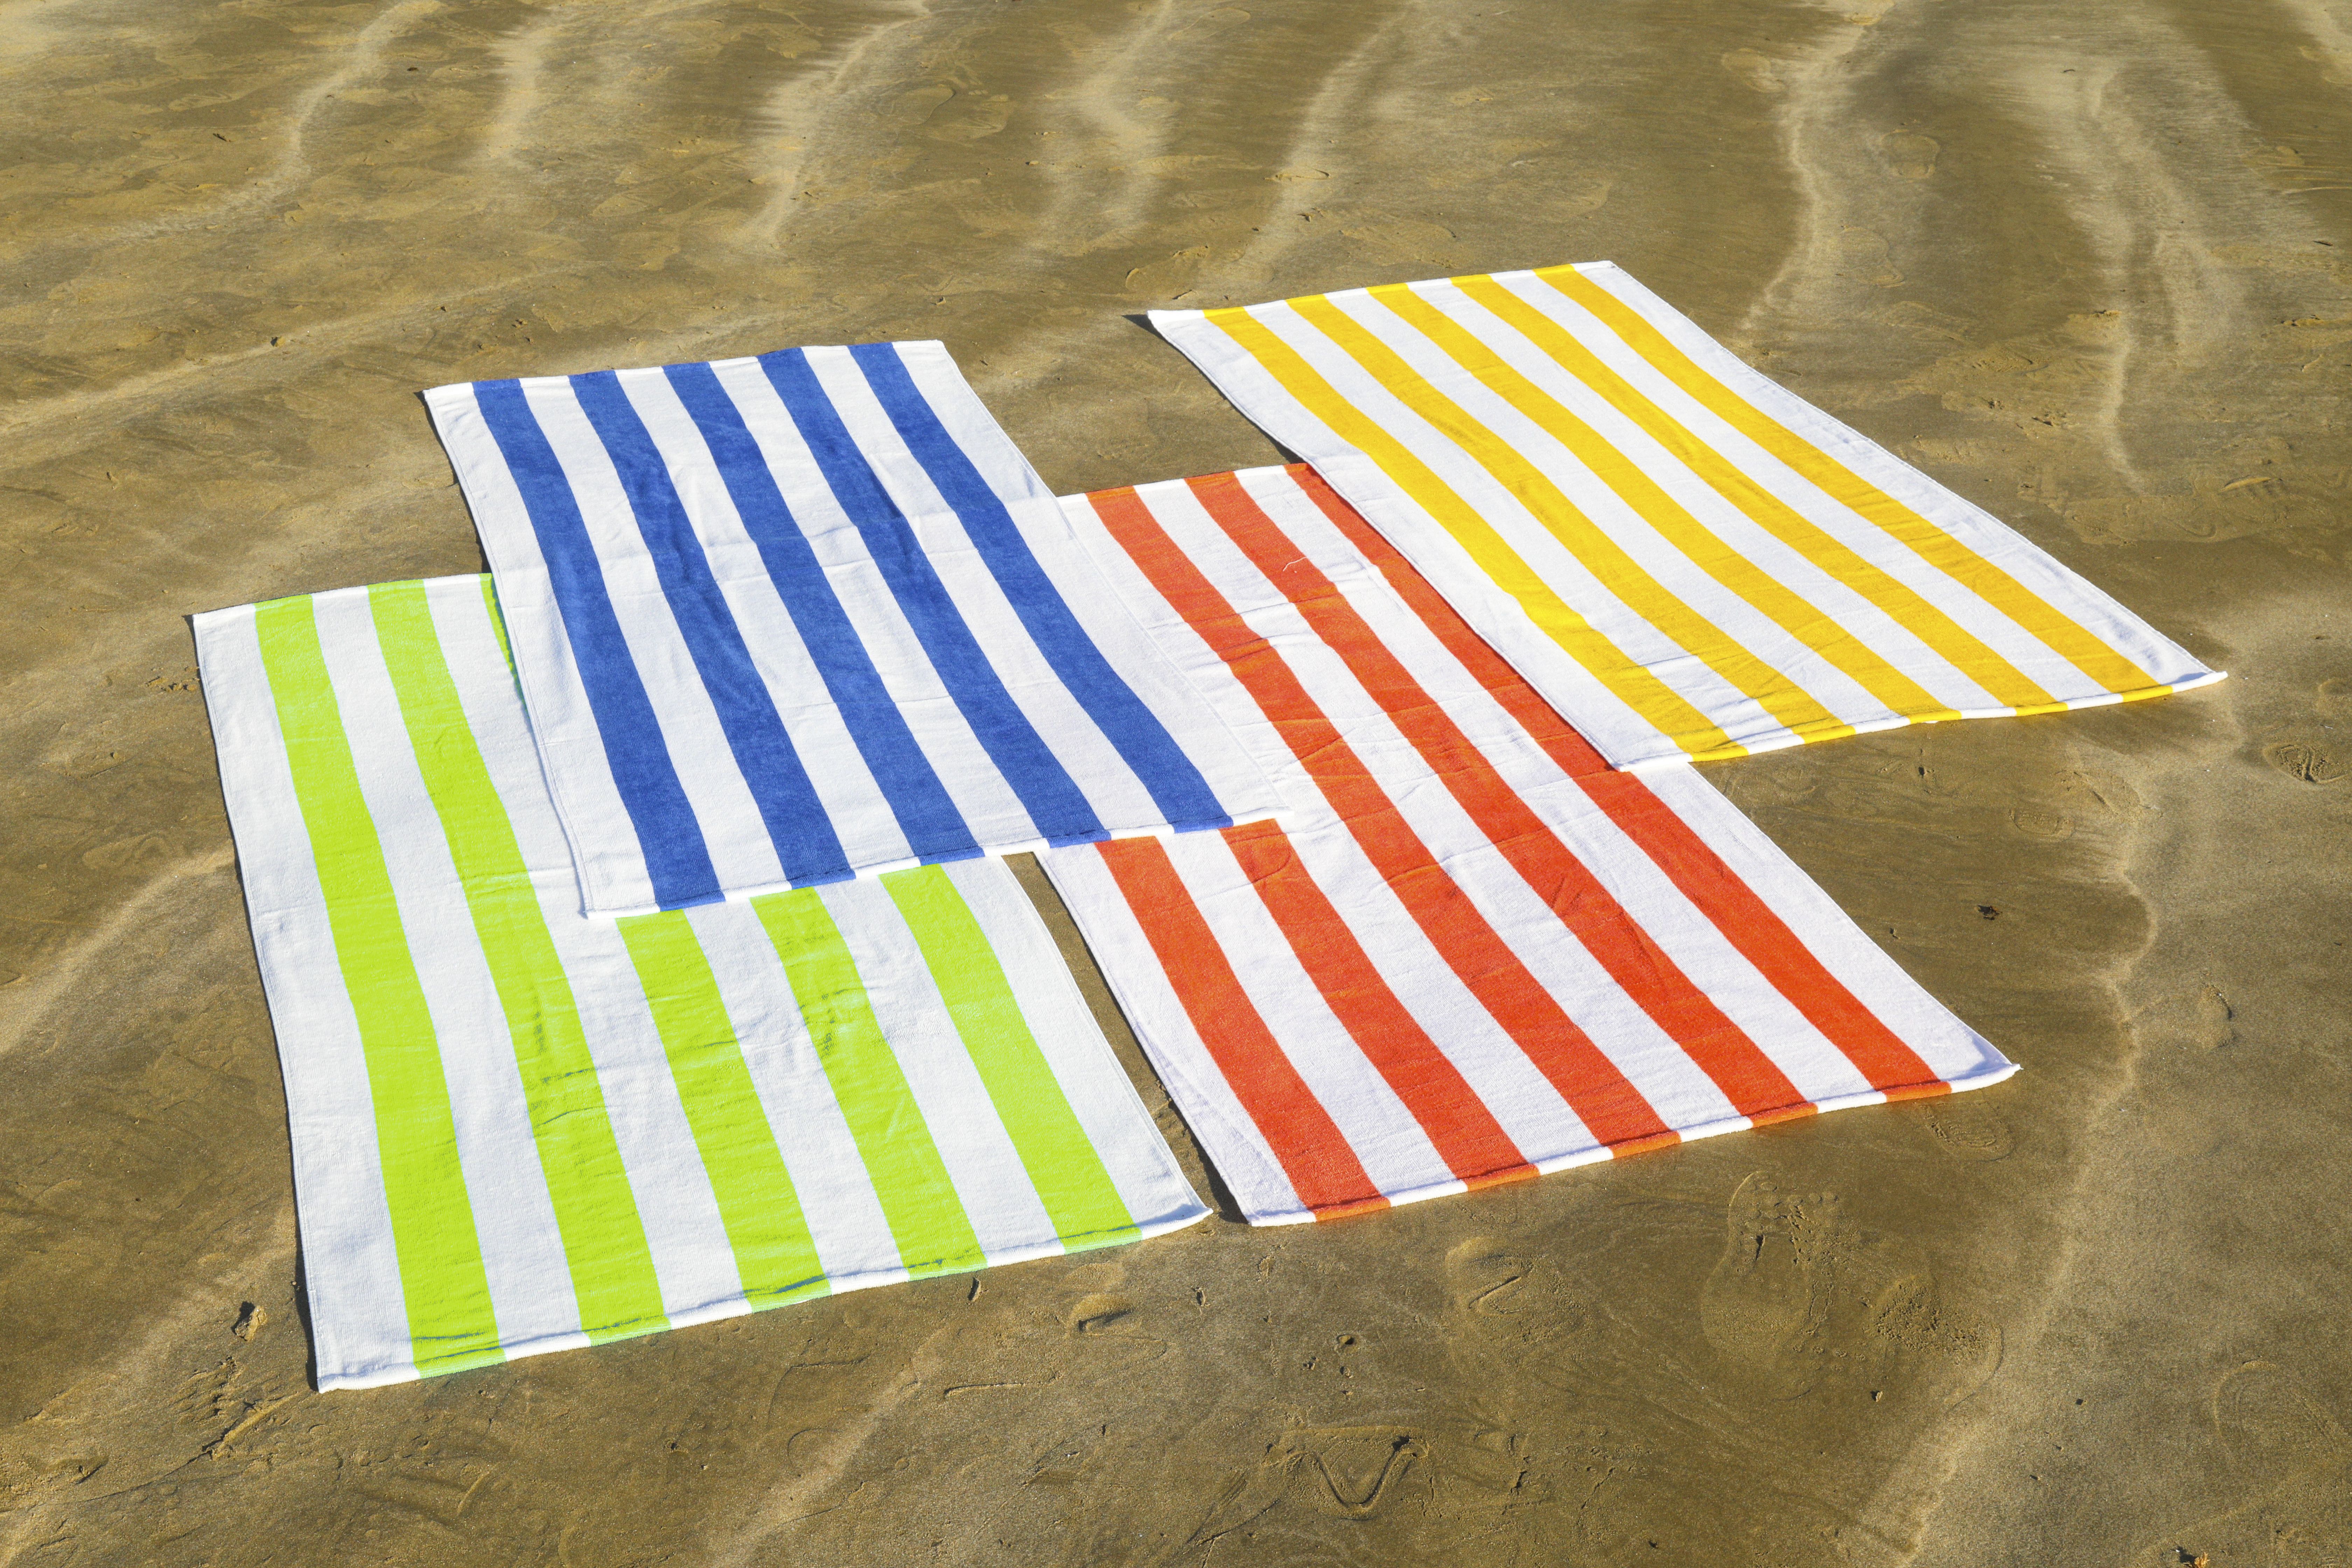 4-Pack Cabana Stripe Beach Towels, Standard Size, Assorted Colors, 28 in x 60 in - image 3 of 5